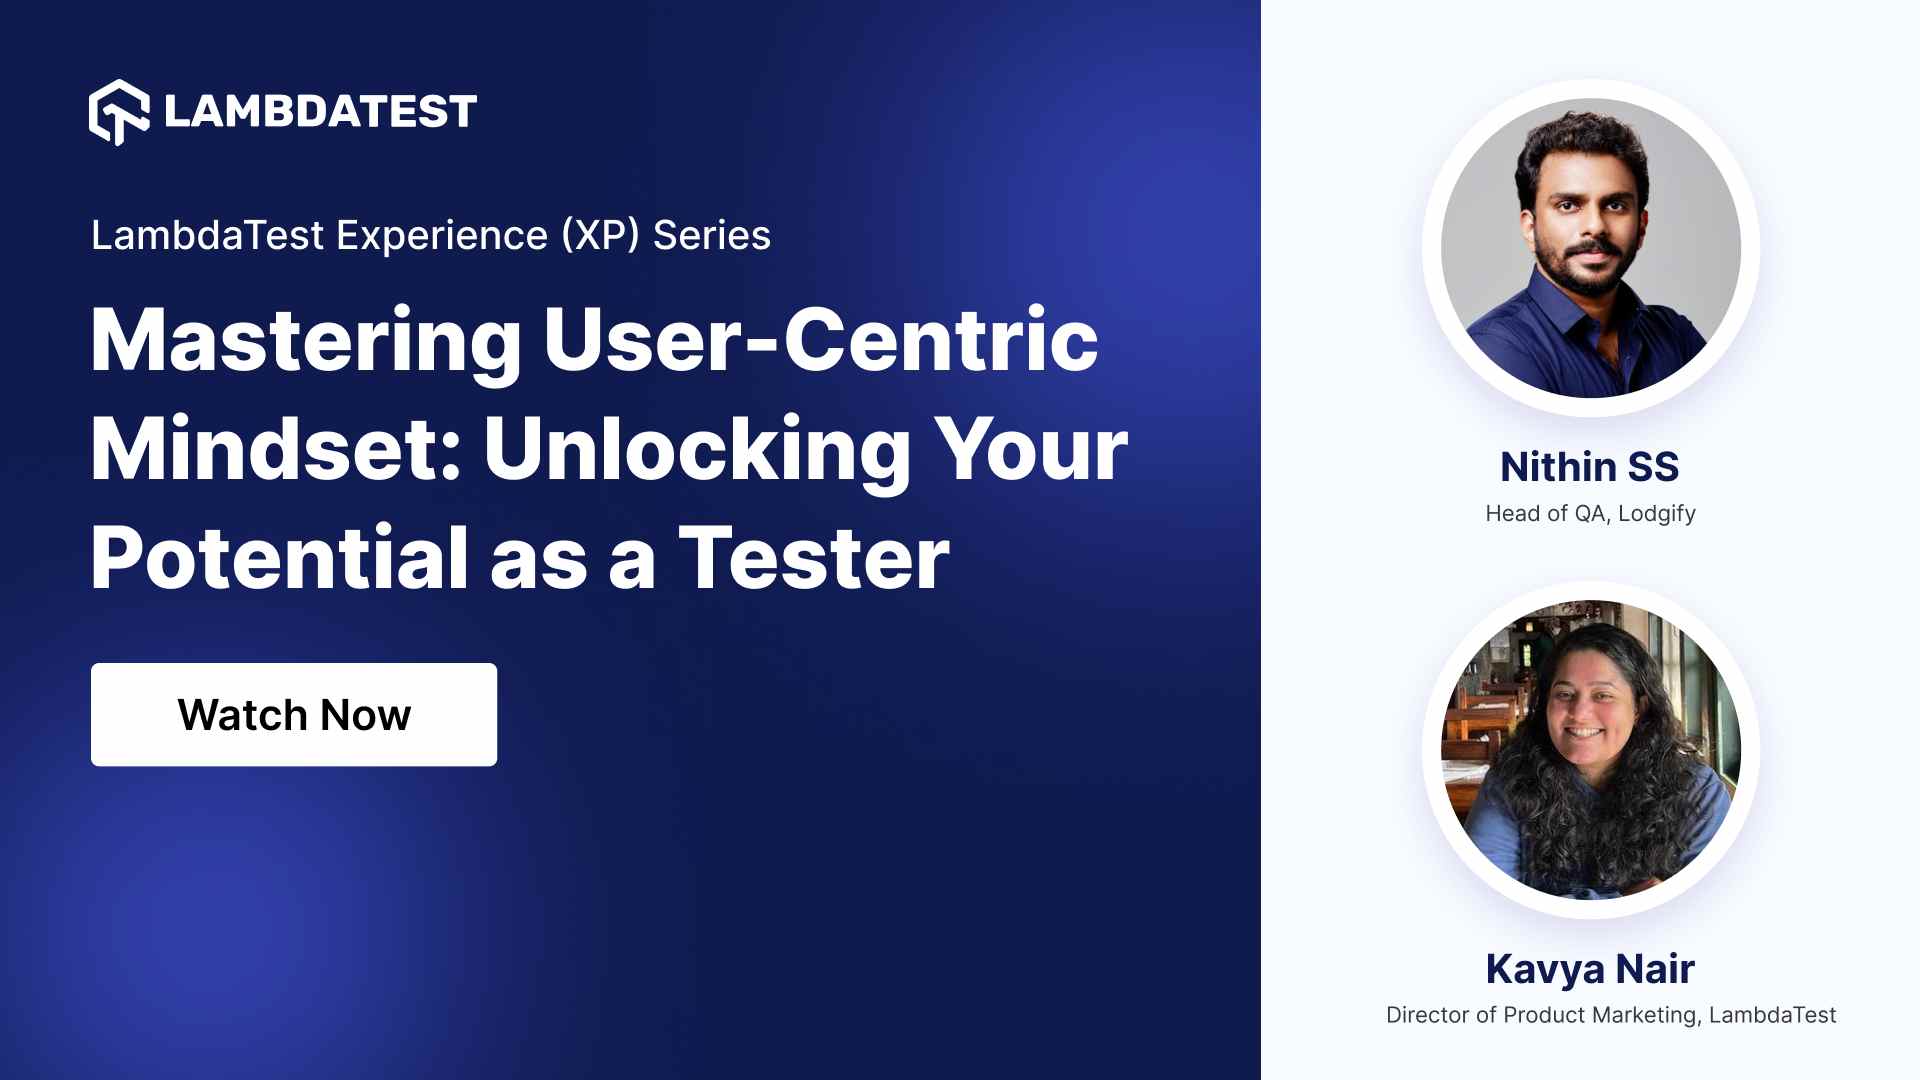 Mastering User-Centric Mindset: Unlocking Your Potential as a Tester